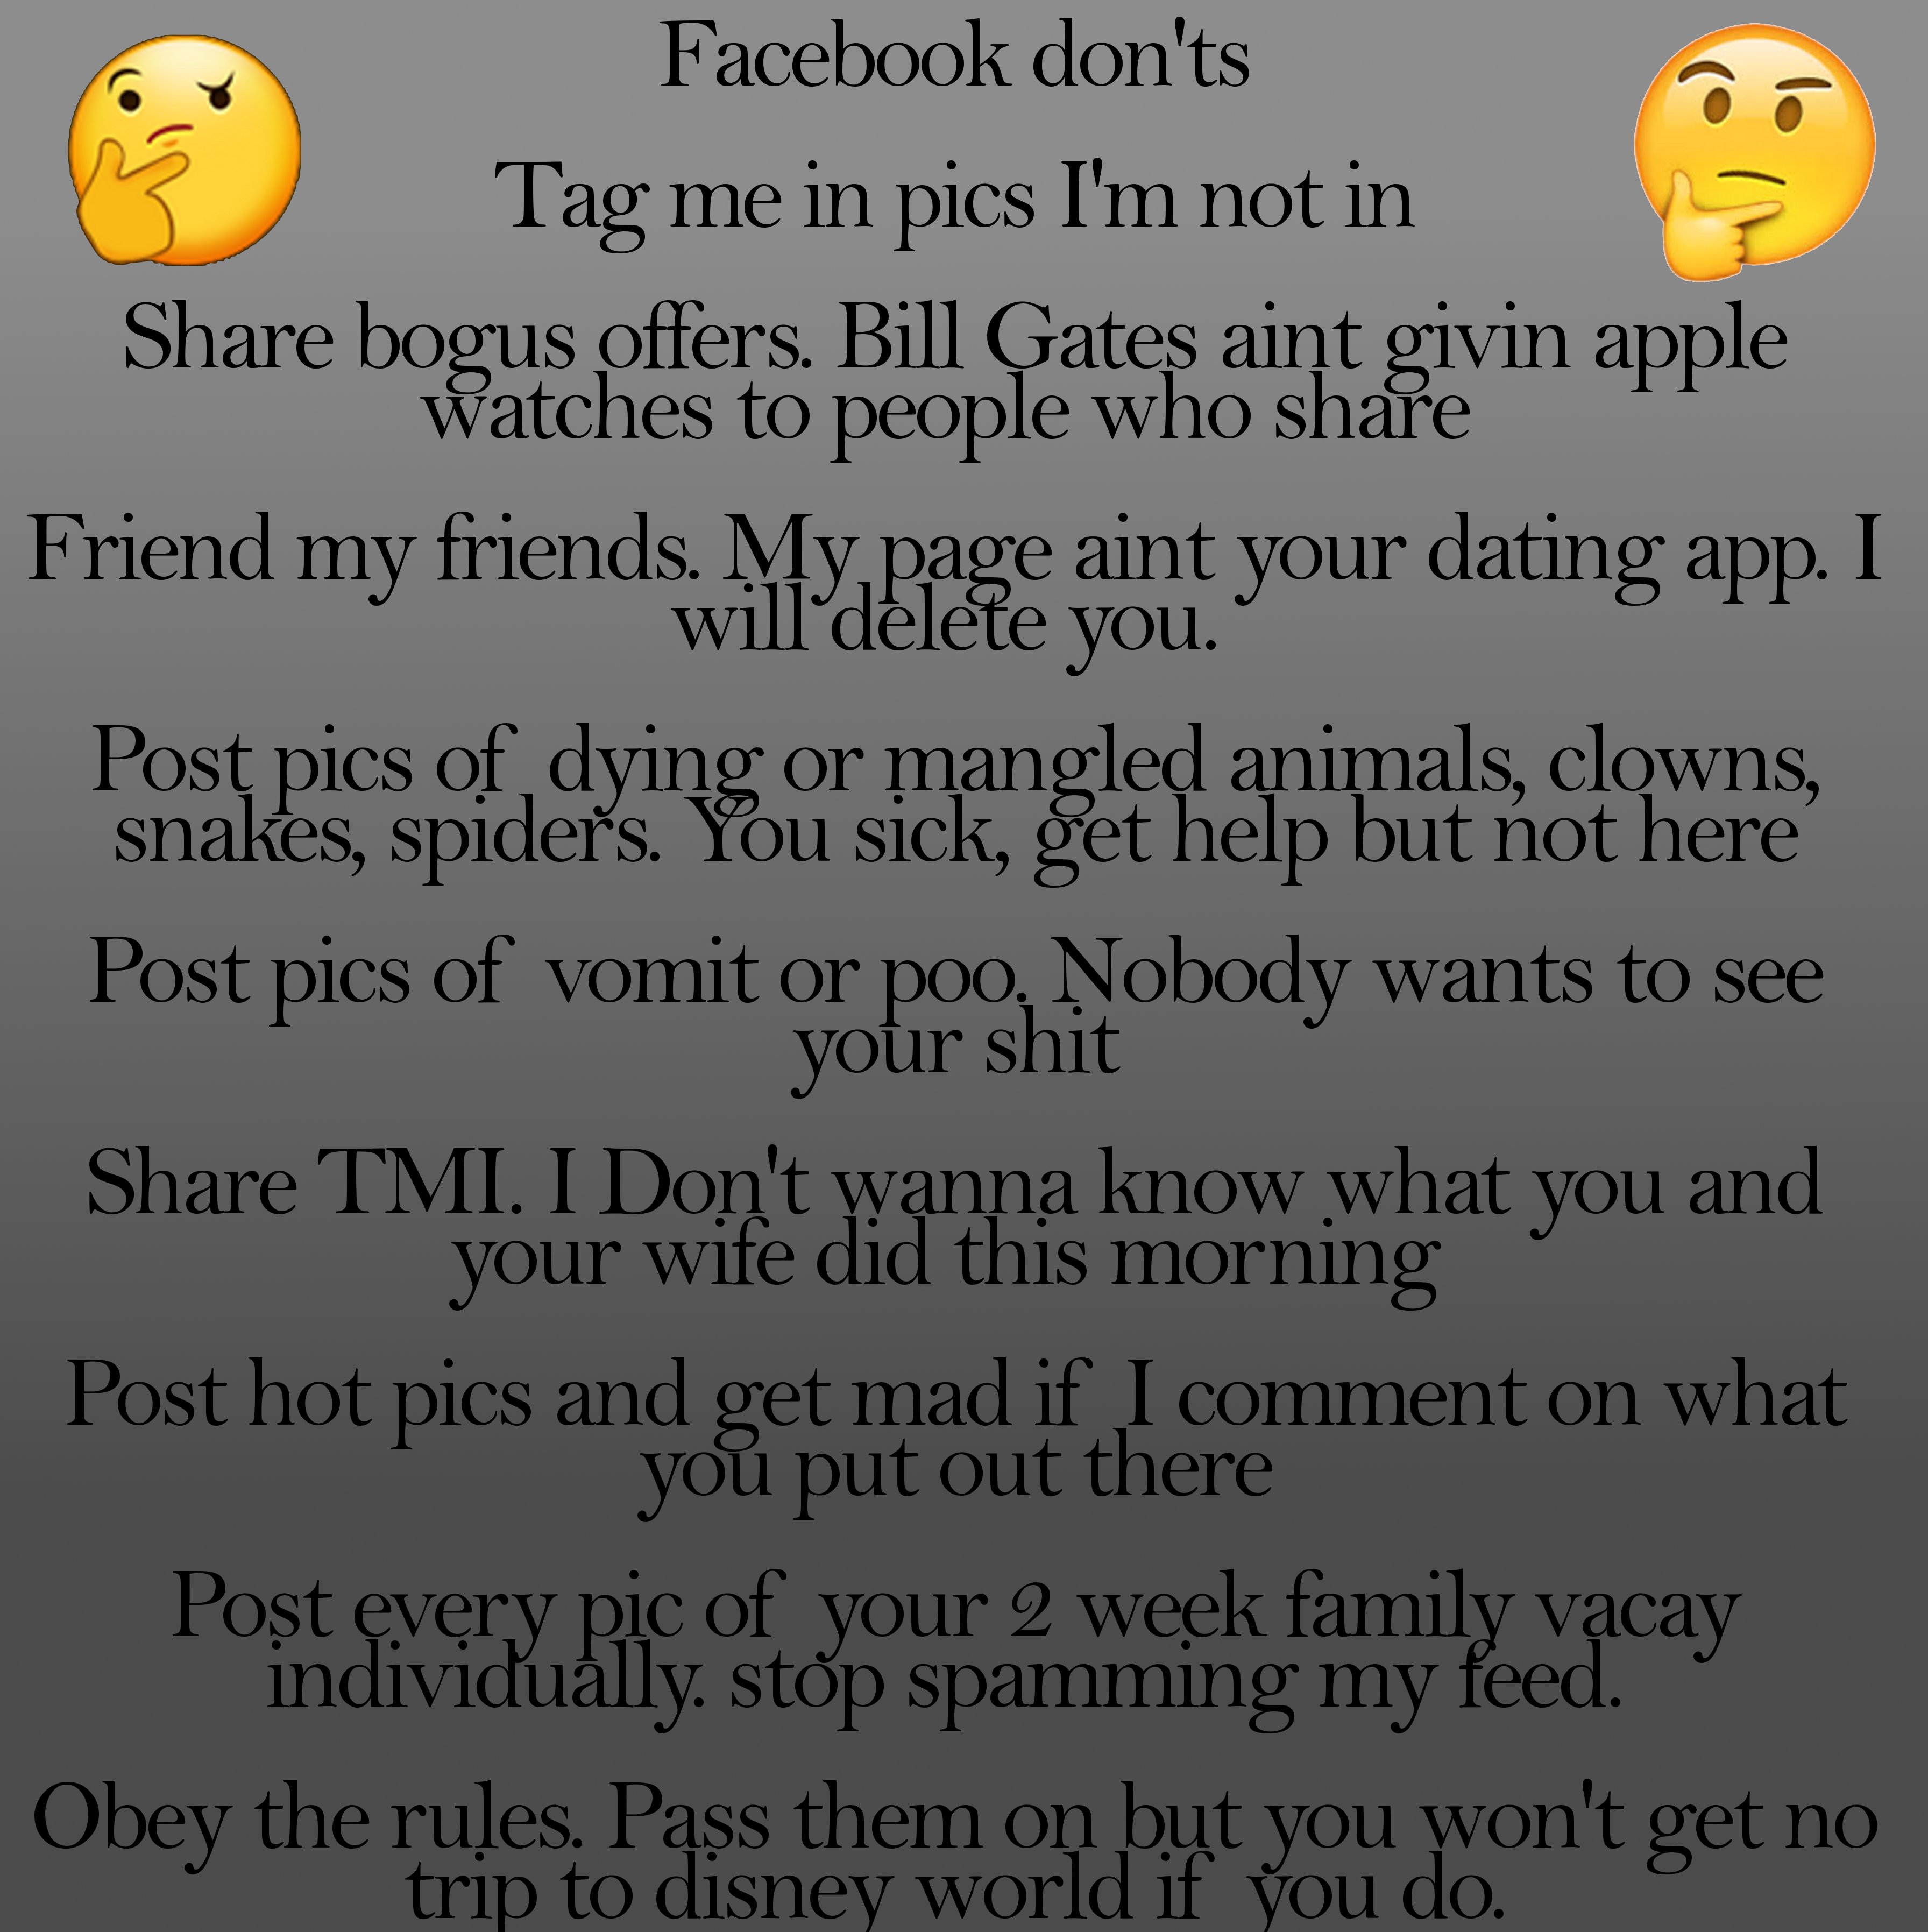 sky - Facebook don'ts Tag me in pics I'm not in bogus offers. Bill Gates aint givin apple Watches to people who Friend my friends. My page aint your dating app. I will delete you." Post pics of dying or mangled animals, clowns, snakes, spiders. You sick, 